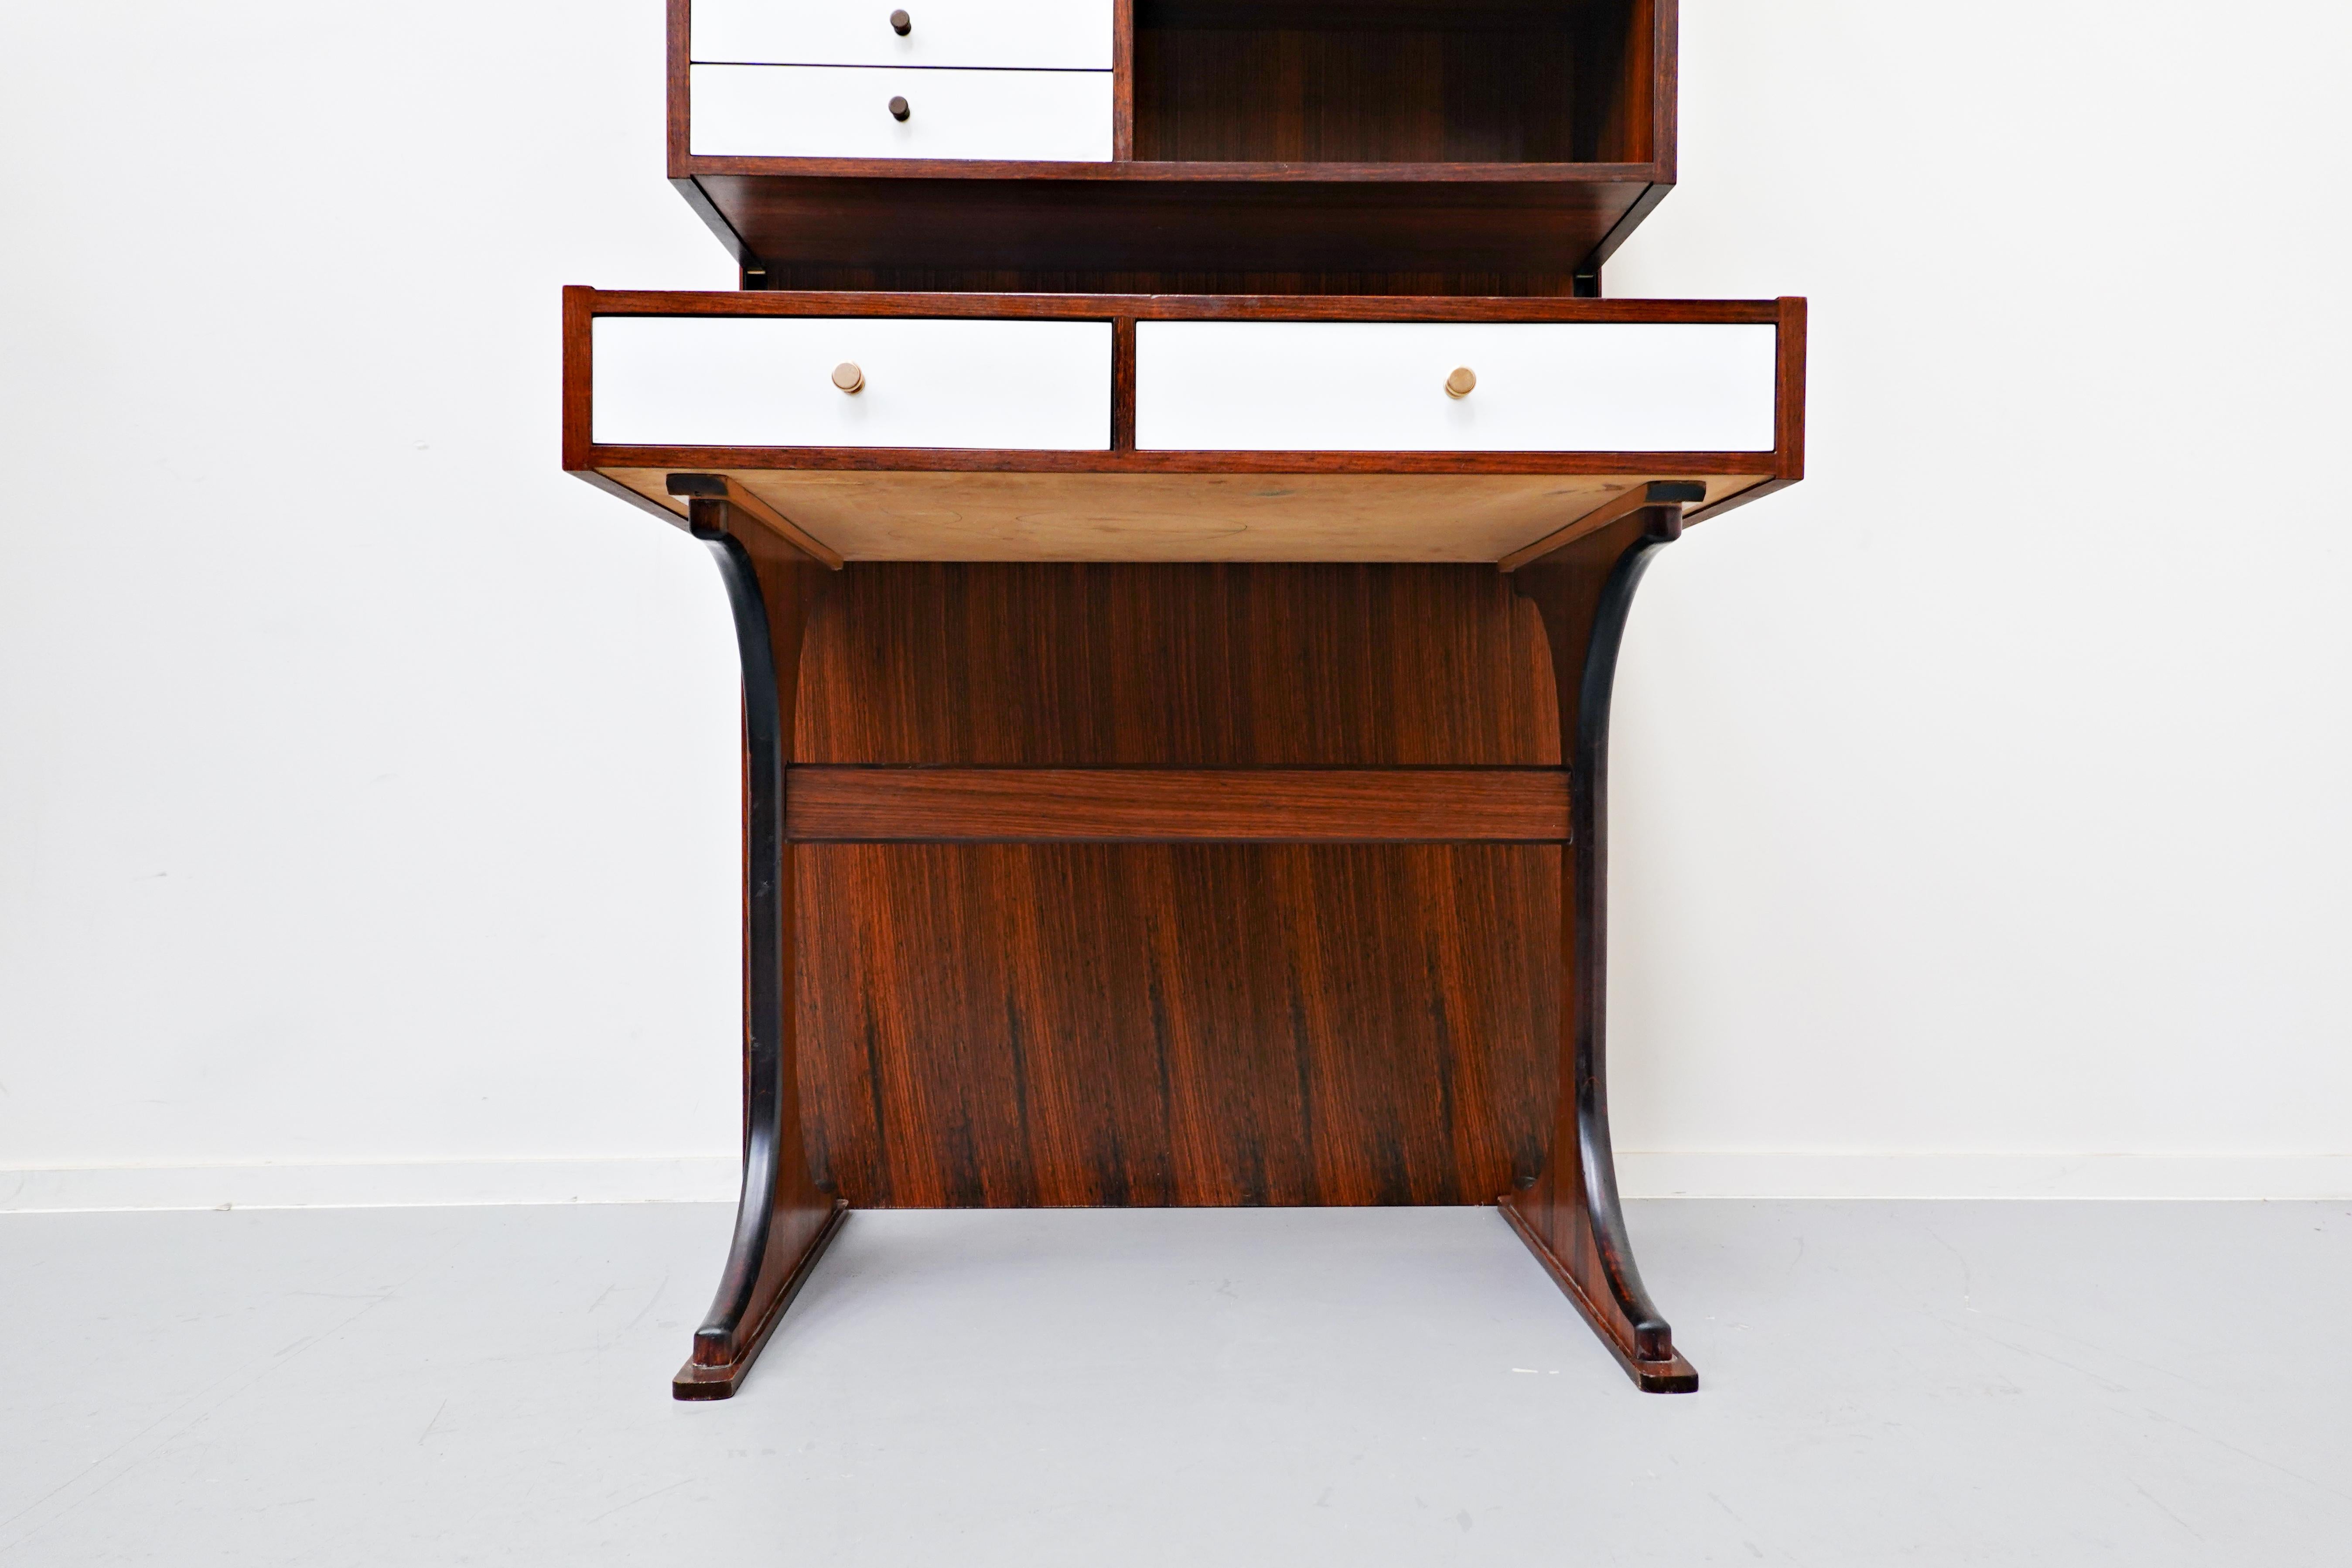 Mid-Century Modern Wall-unit desk attributed to Sormani, Italy, 1960s.